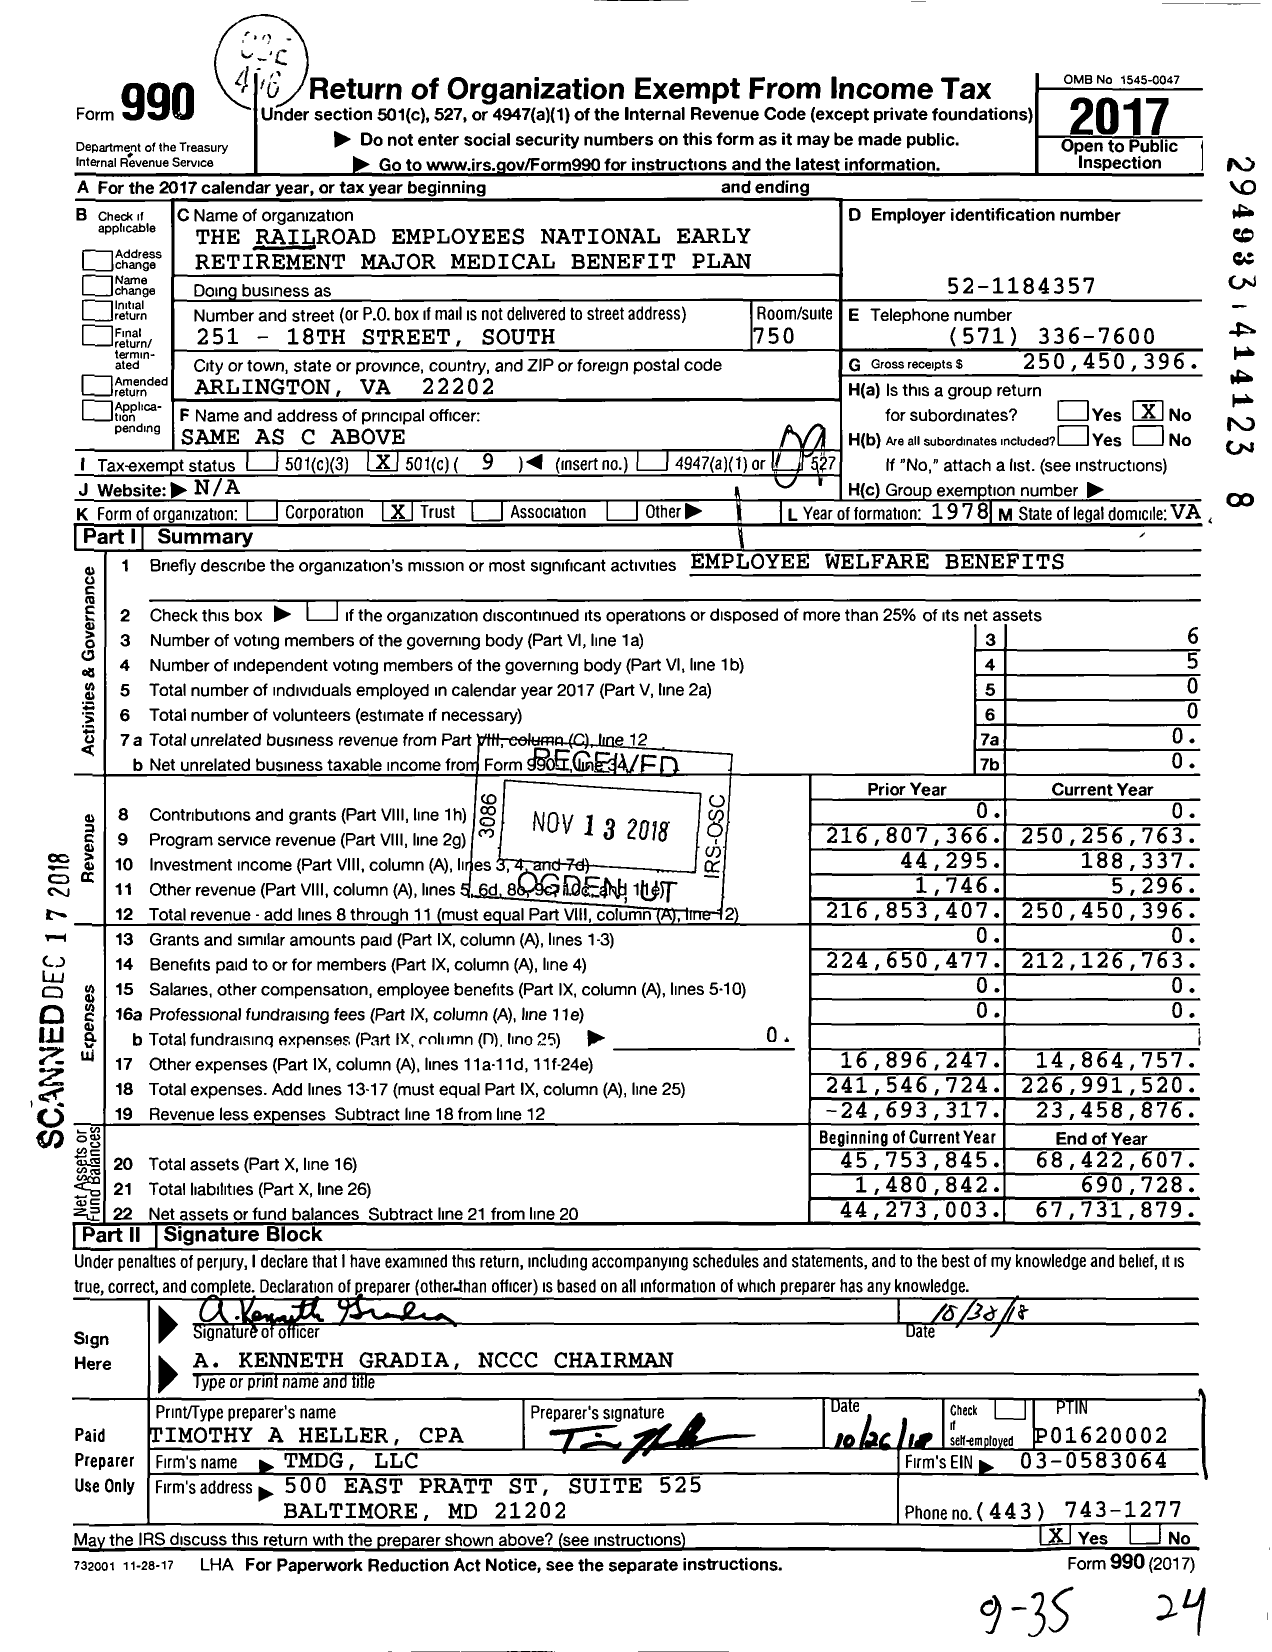 Image of first page of 2017 Form 990O for Railroad Employees National Early Retirement Major Medical Benefit Plan